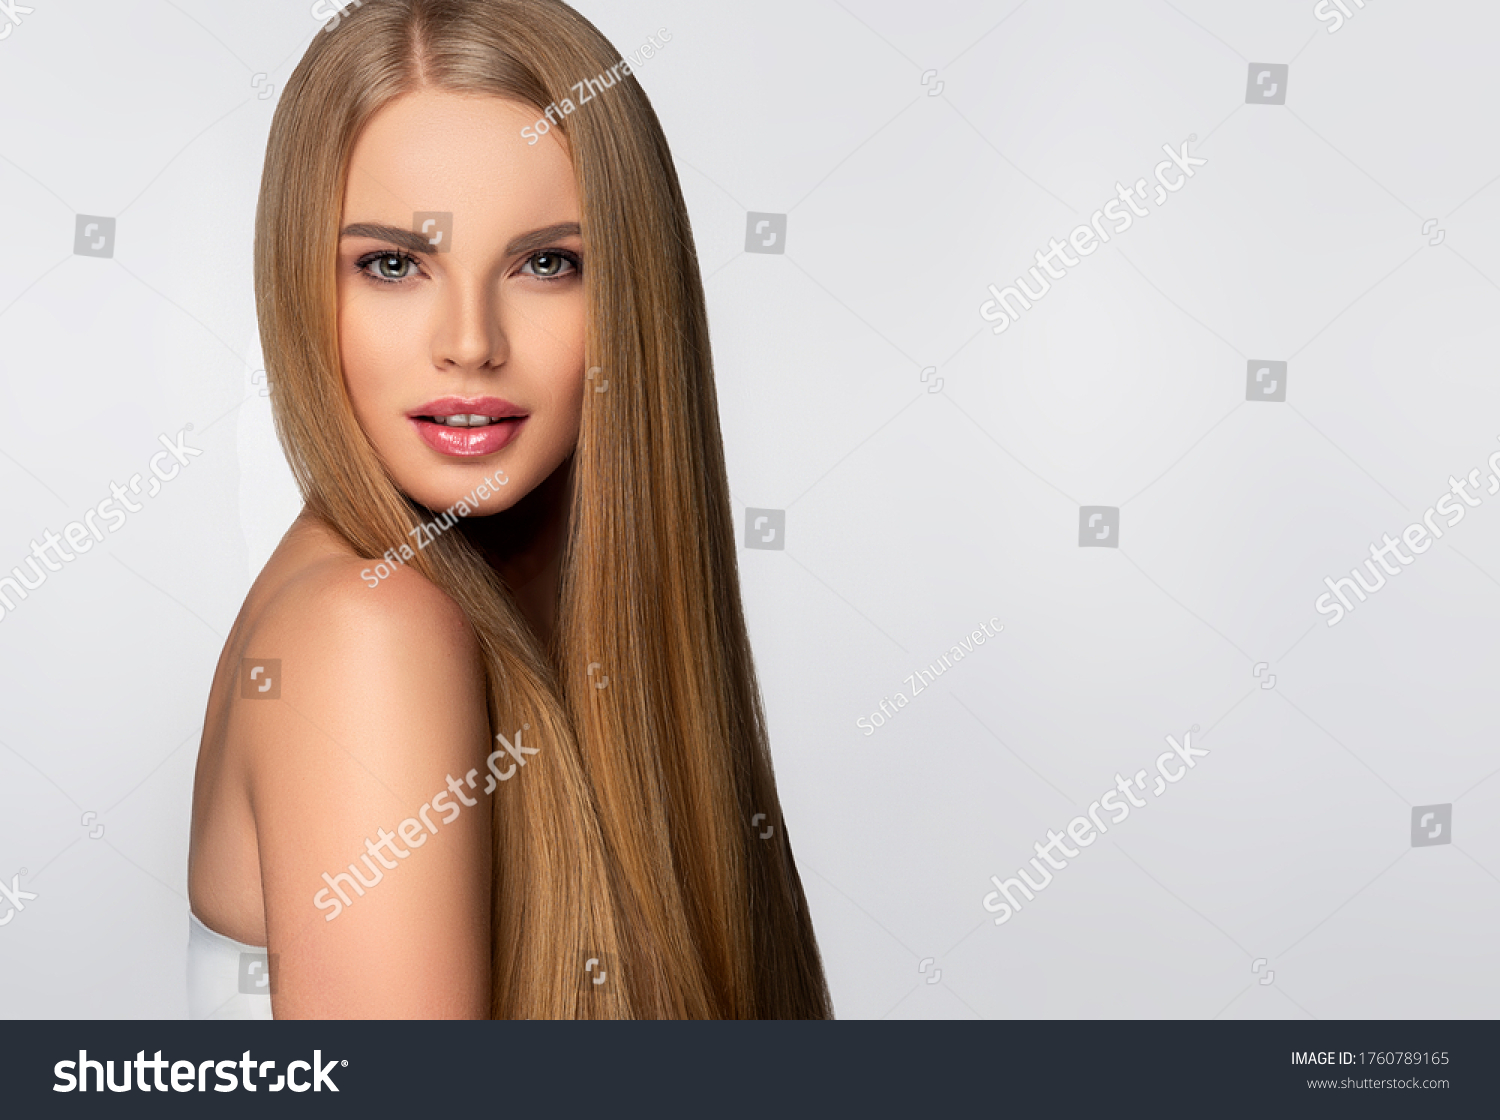 Beautiful model woman with shiny  and straight long hair. Keratin  straightening. Treatment, care and spa procedures. Blonde beauty  girl smooth hairstyle #1760789165